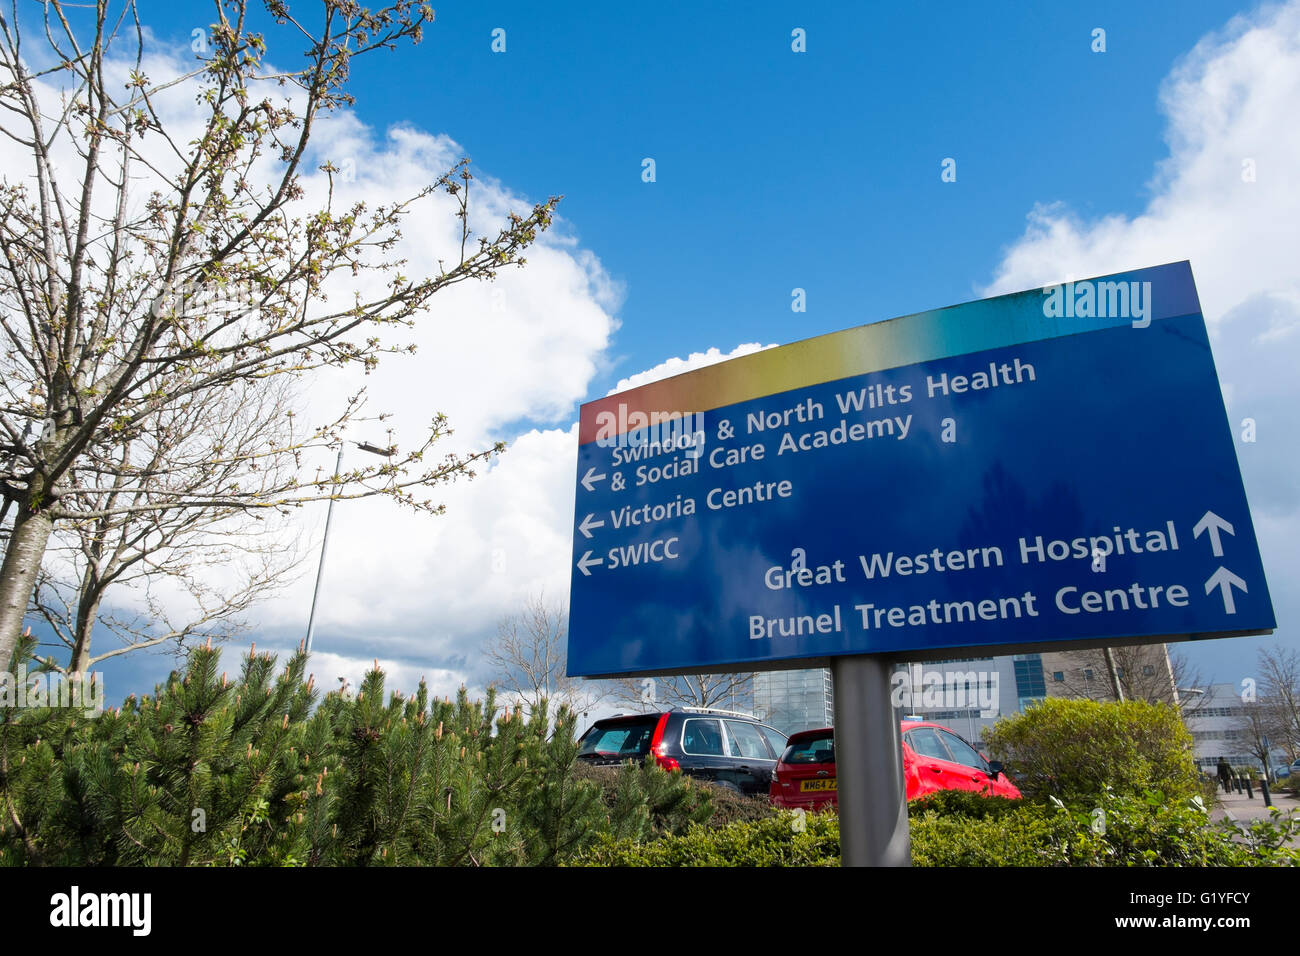 Sign showing directions to departments at the Great Western Hospital in Swindon, Wiltshire, UK Stock Photo